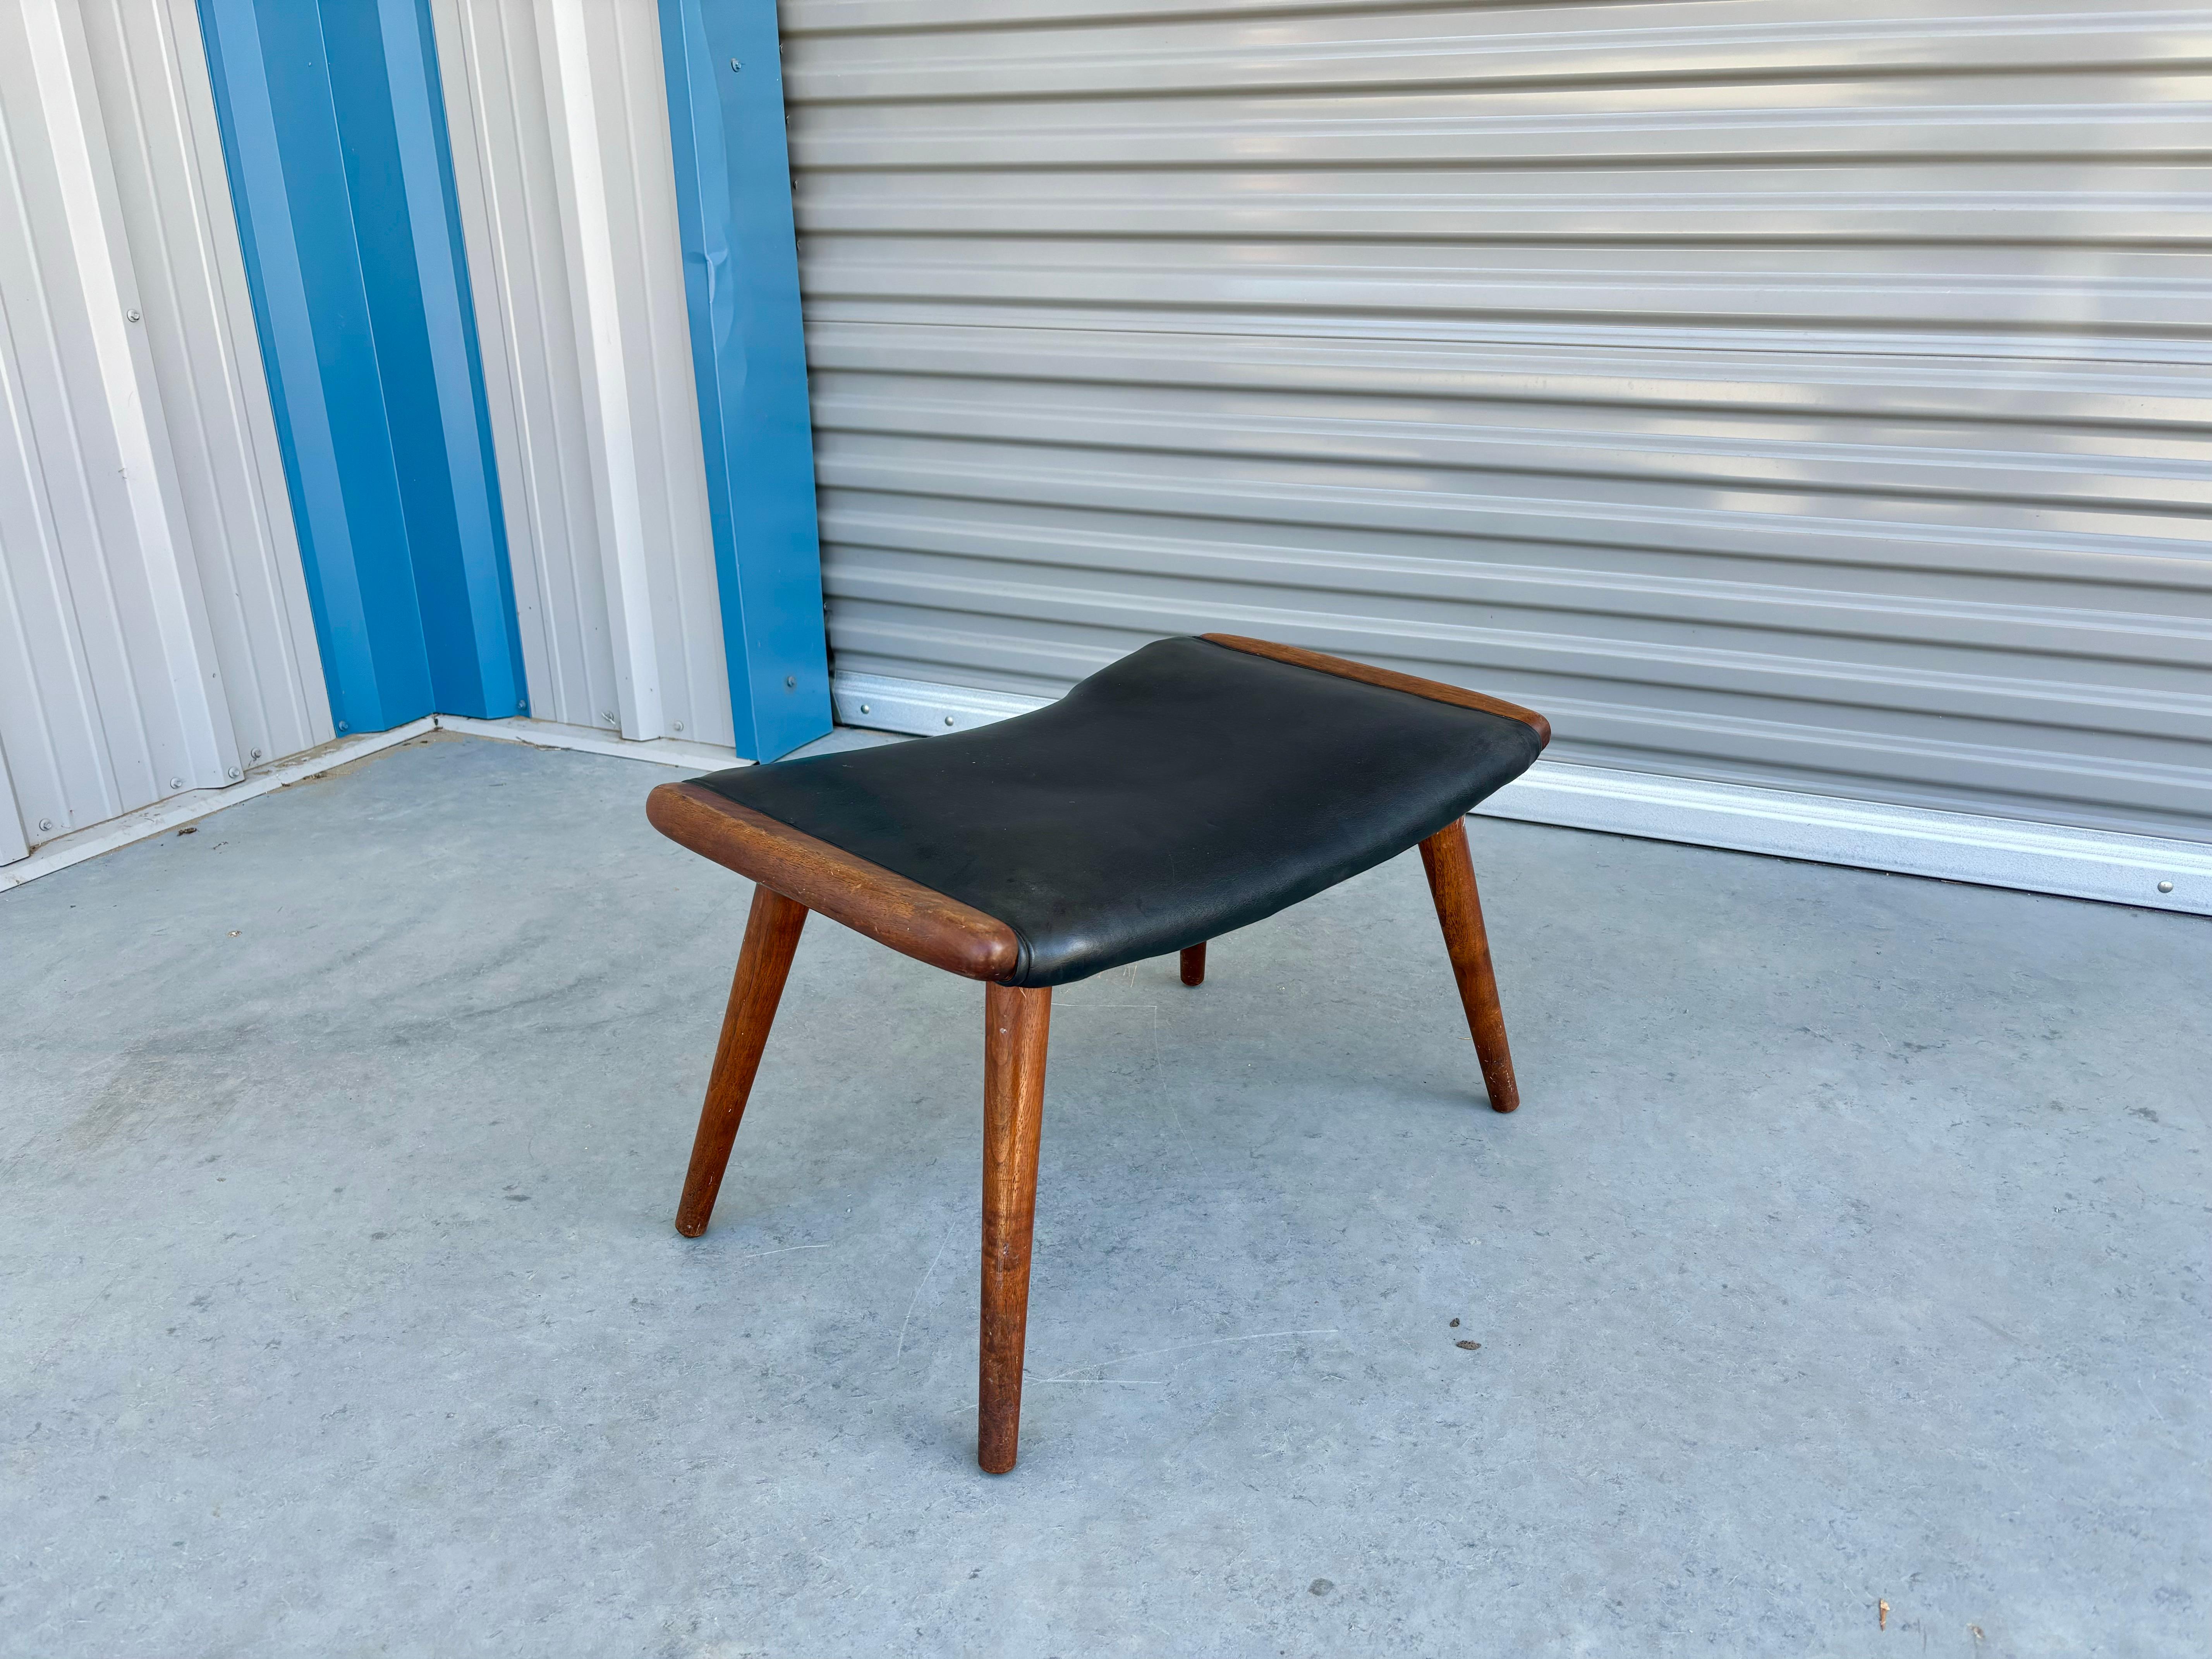 Mid Century papa bear ottoman designed and manufactured in the United States circa 1970s. This stunning stool exudes elegance and sophistication with its sleek black leather upholstery that perfectly complements the rich tones of the teak frame.